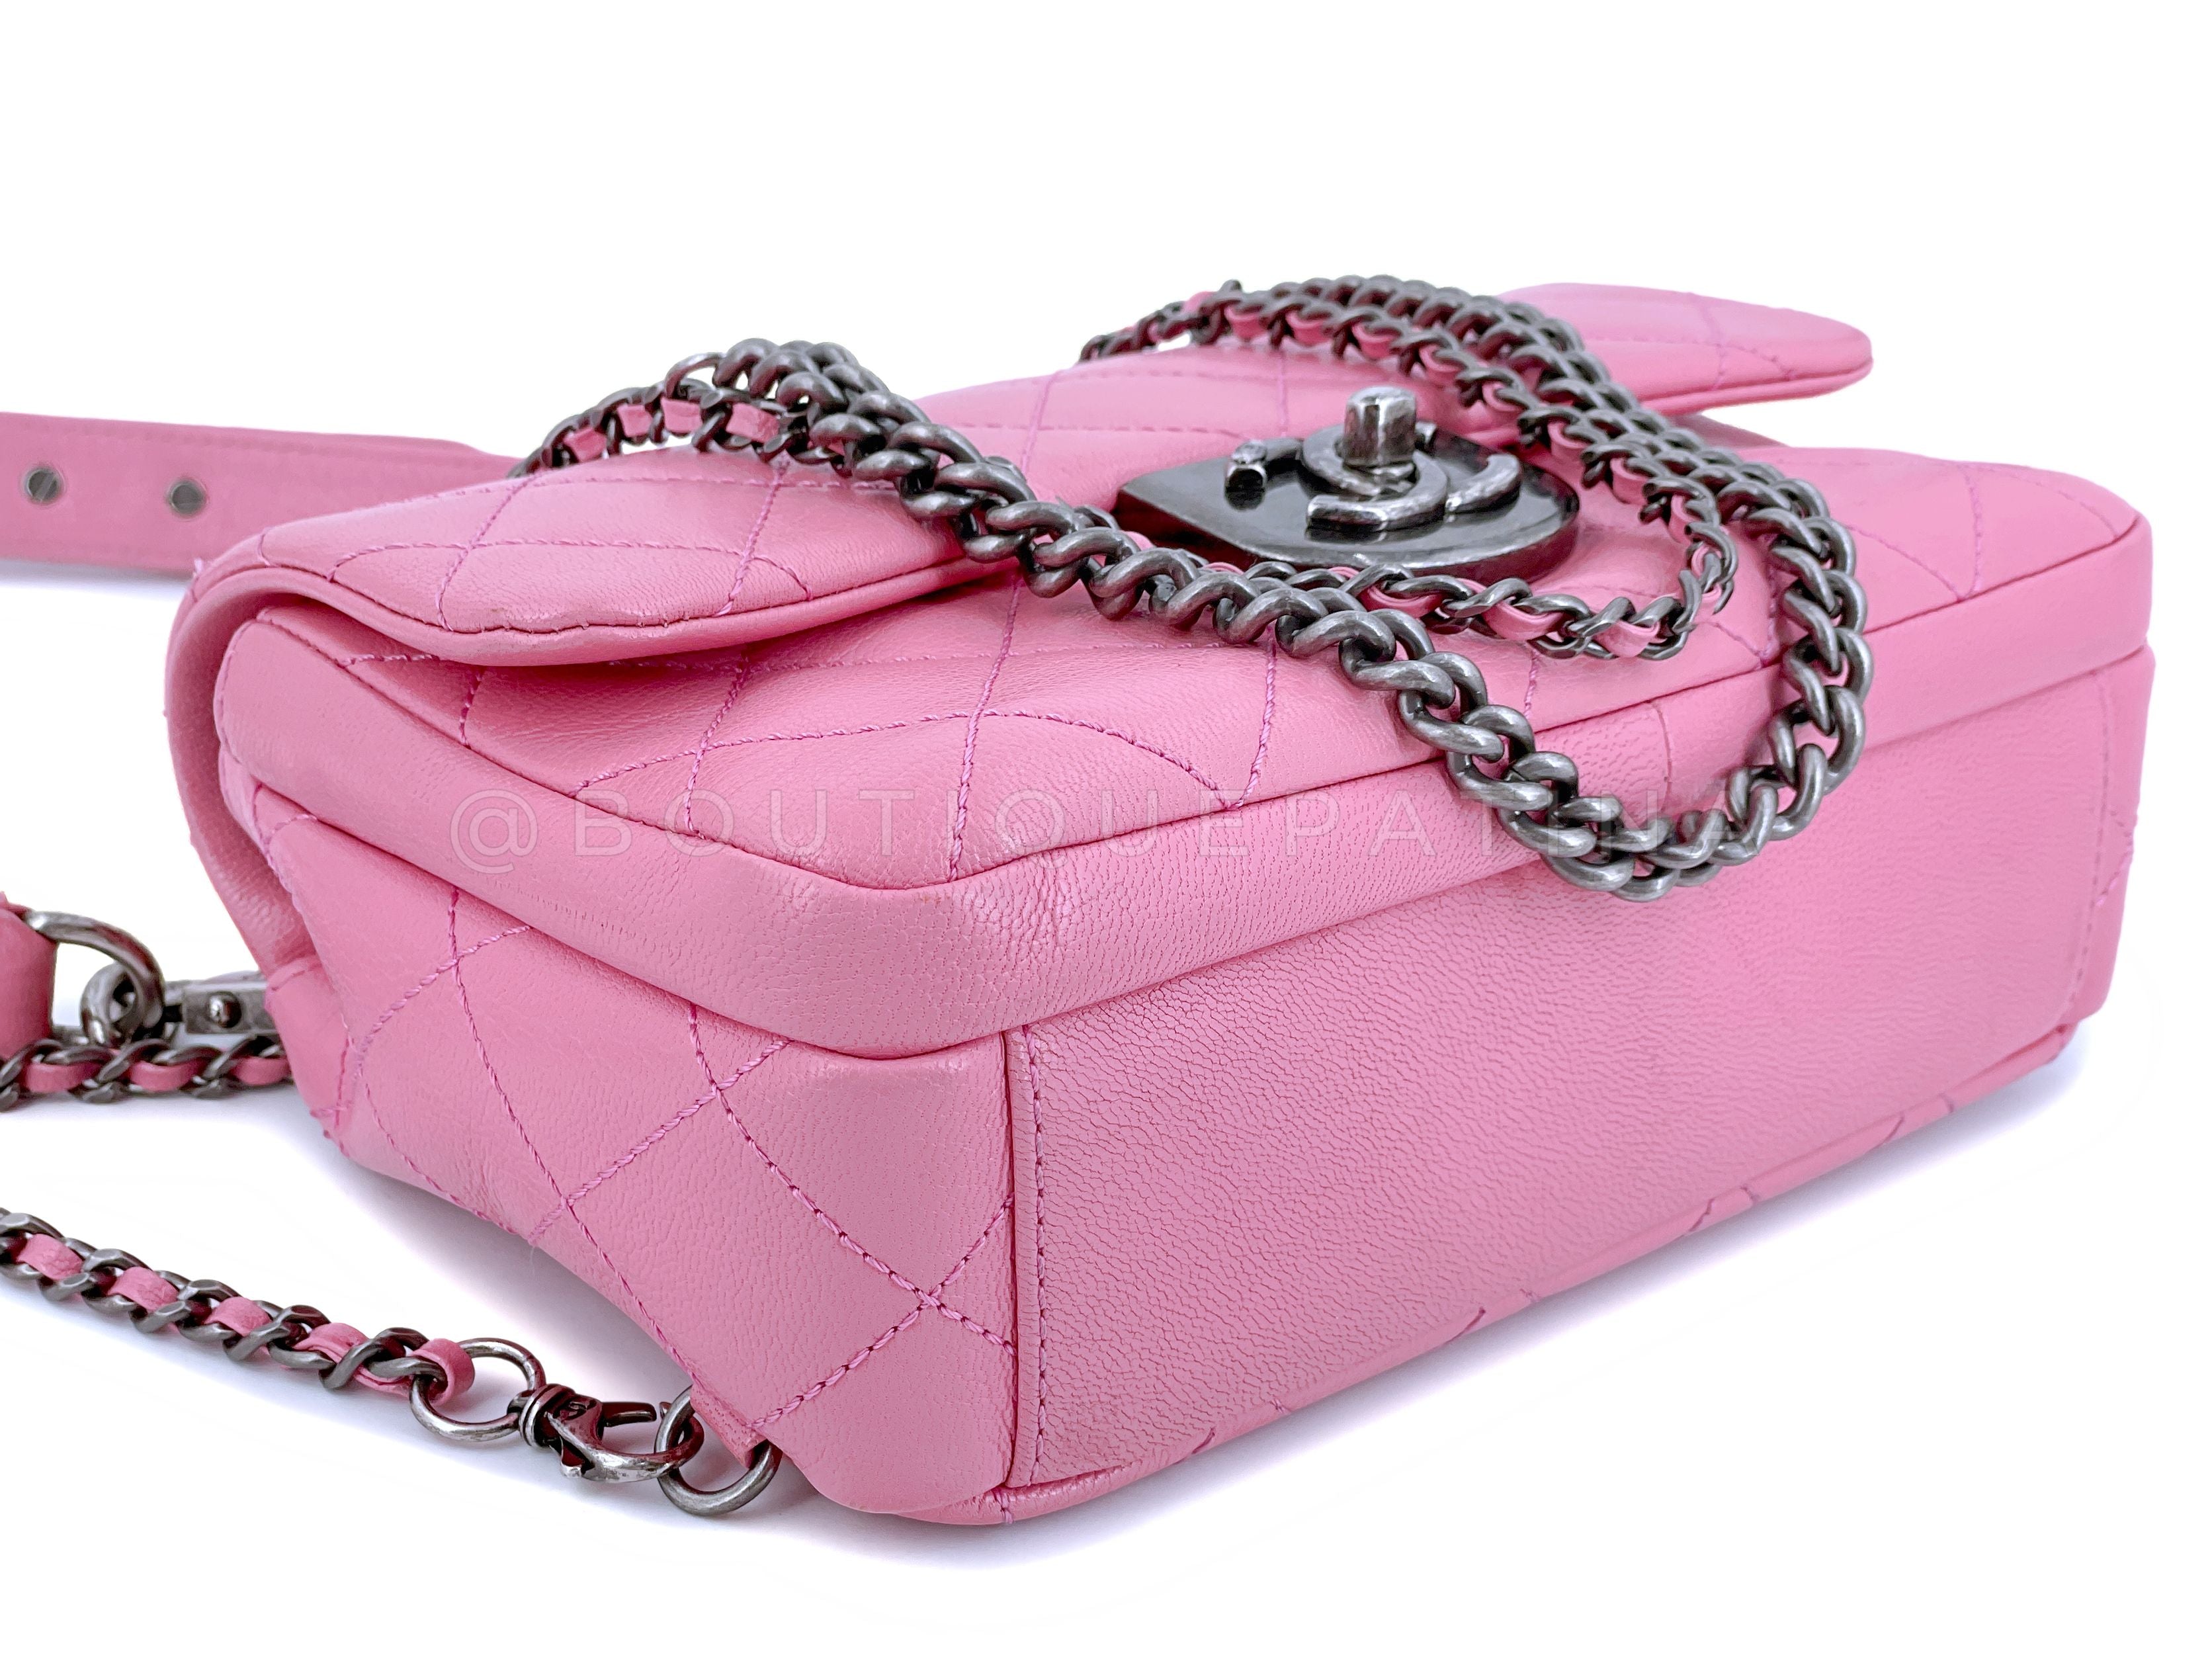 Chanel 2015 Pink Goatskin Double Carry Multichain Quilted Medium Flap Bag RHW